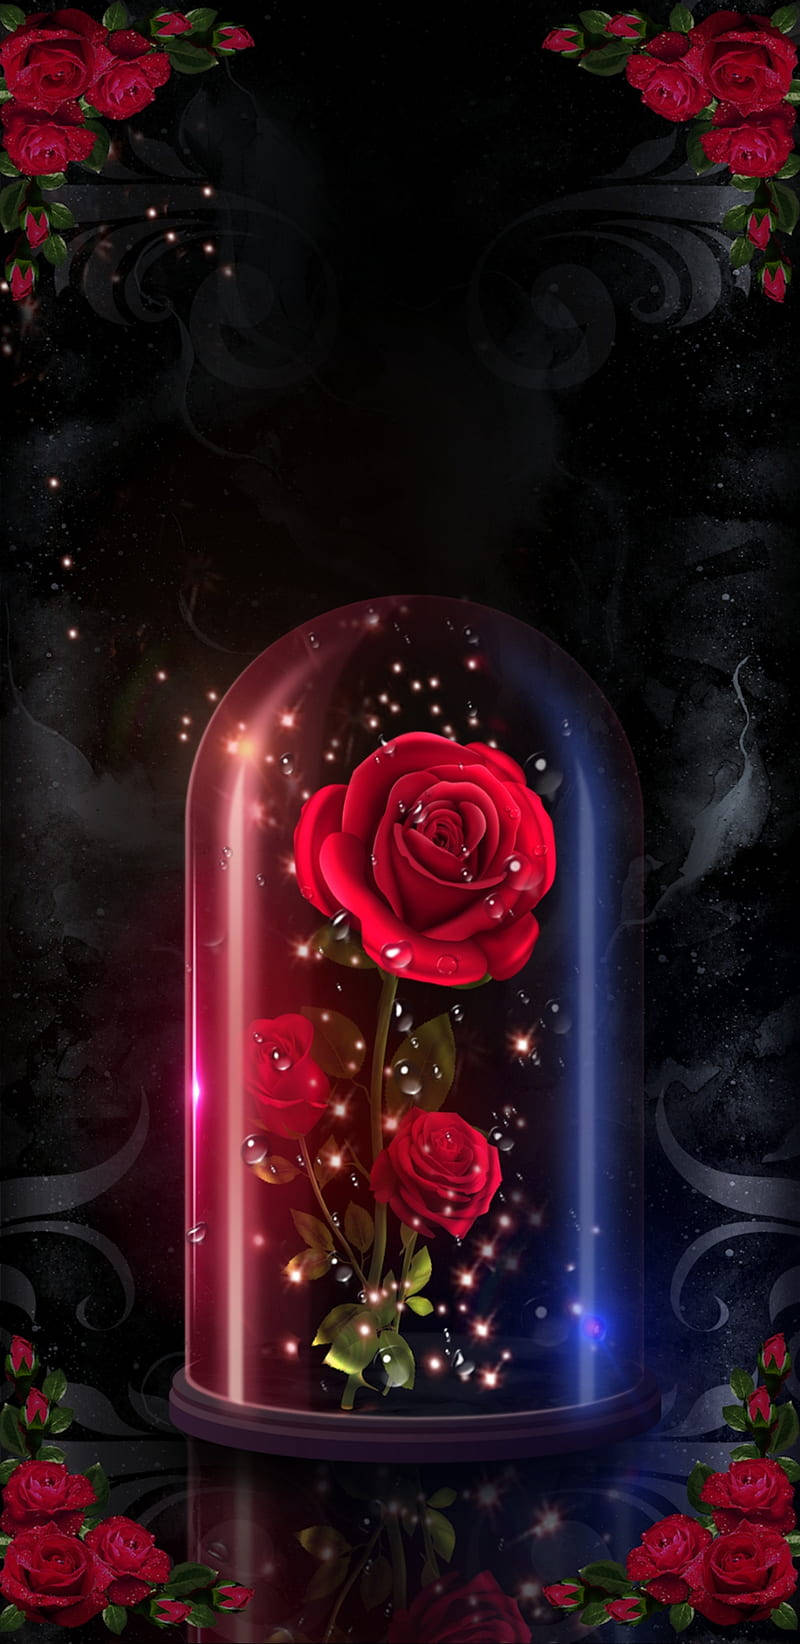 Romantic Rose Inside Glass Container Background